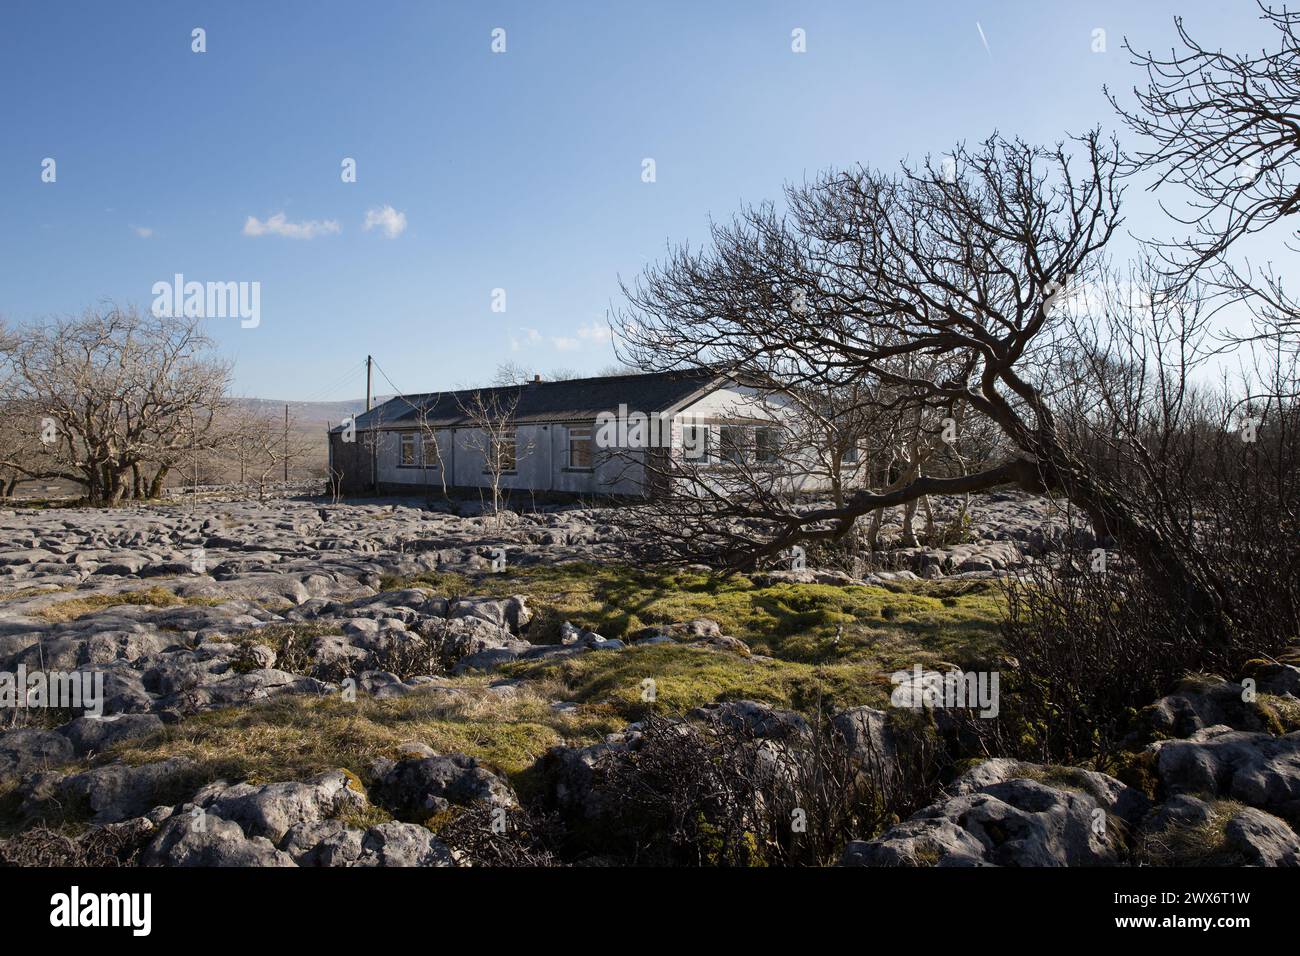 A remote building / outdoor centre sat on a mossy limestone pavement in the North Yorkshire countryside, UK, taken on a beautiful sunny day Stock Photo